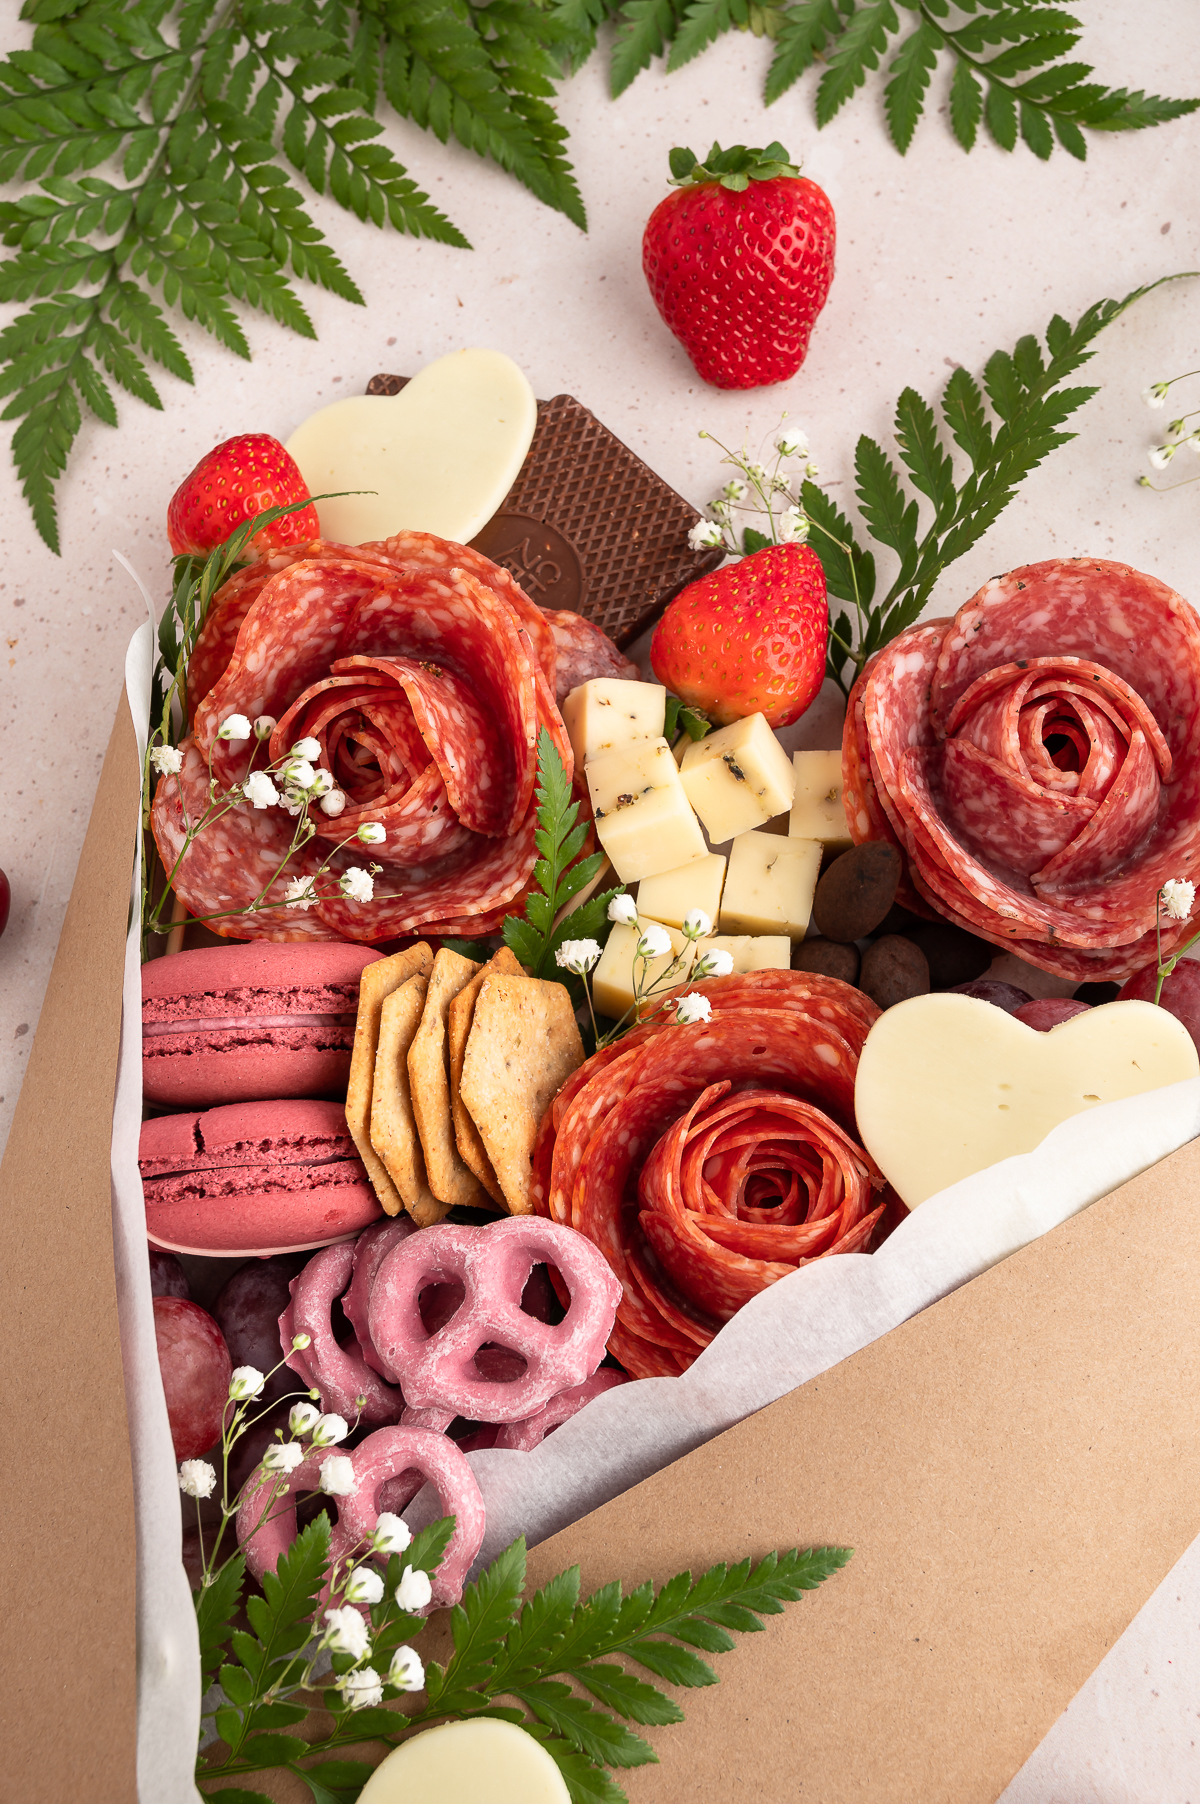 up close view of charcuterie bouquet with salami roses, cheeses, grapes, chocolates